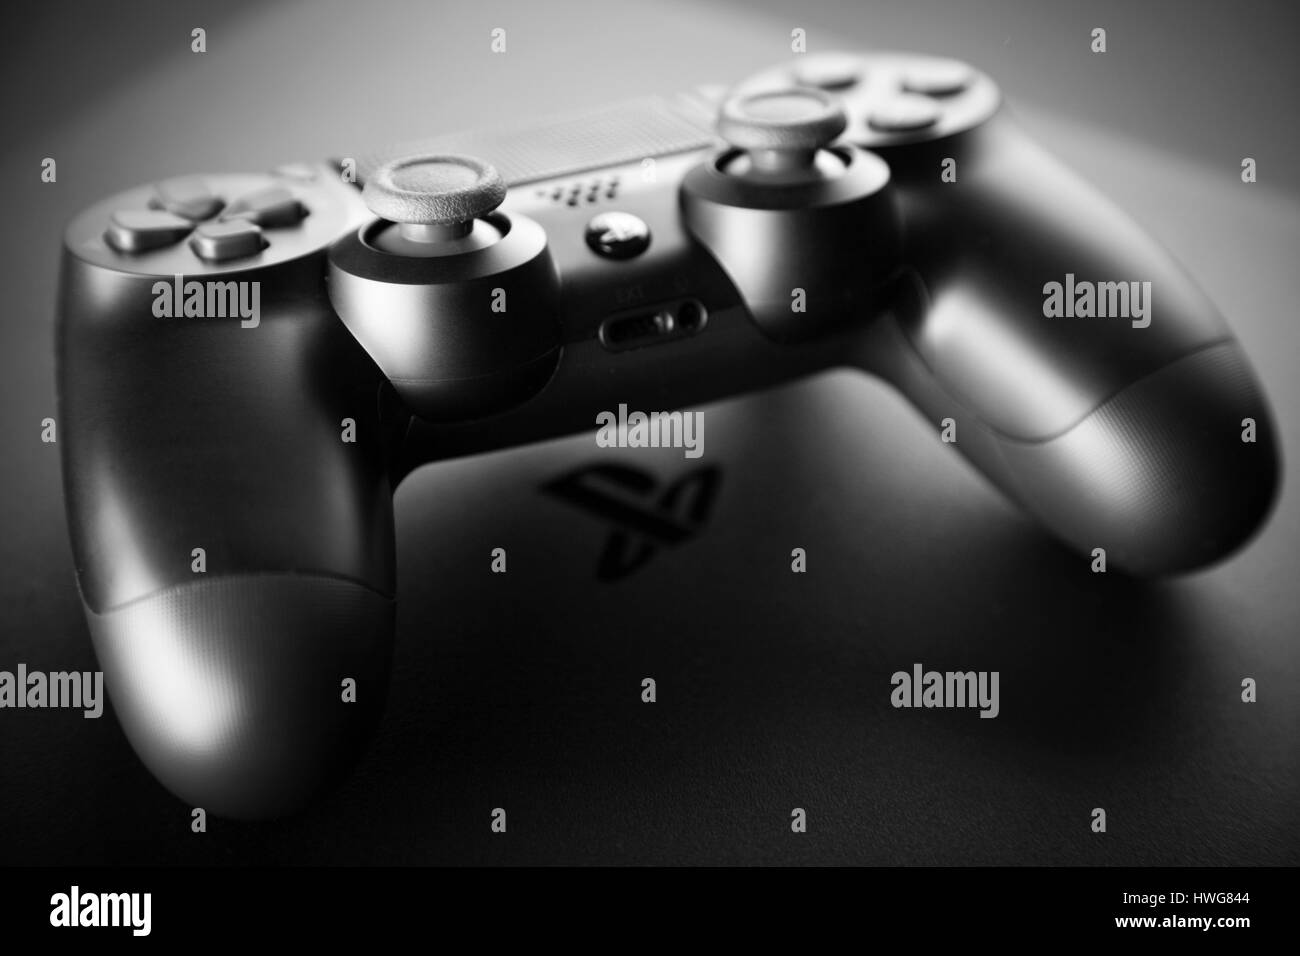 Playstation 4 gaming console Stock Photo